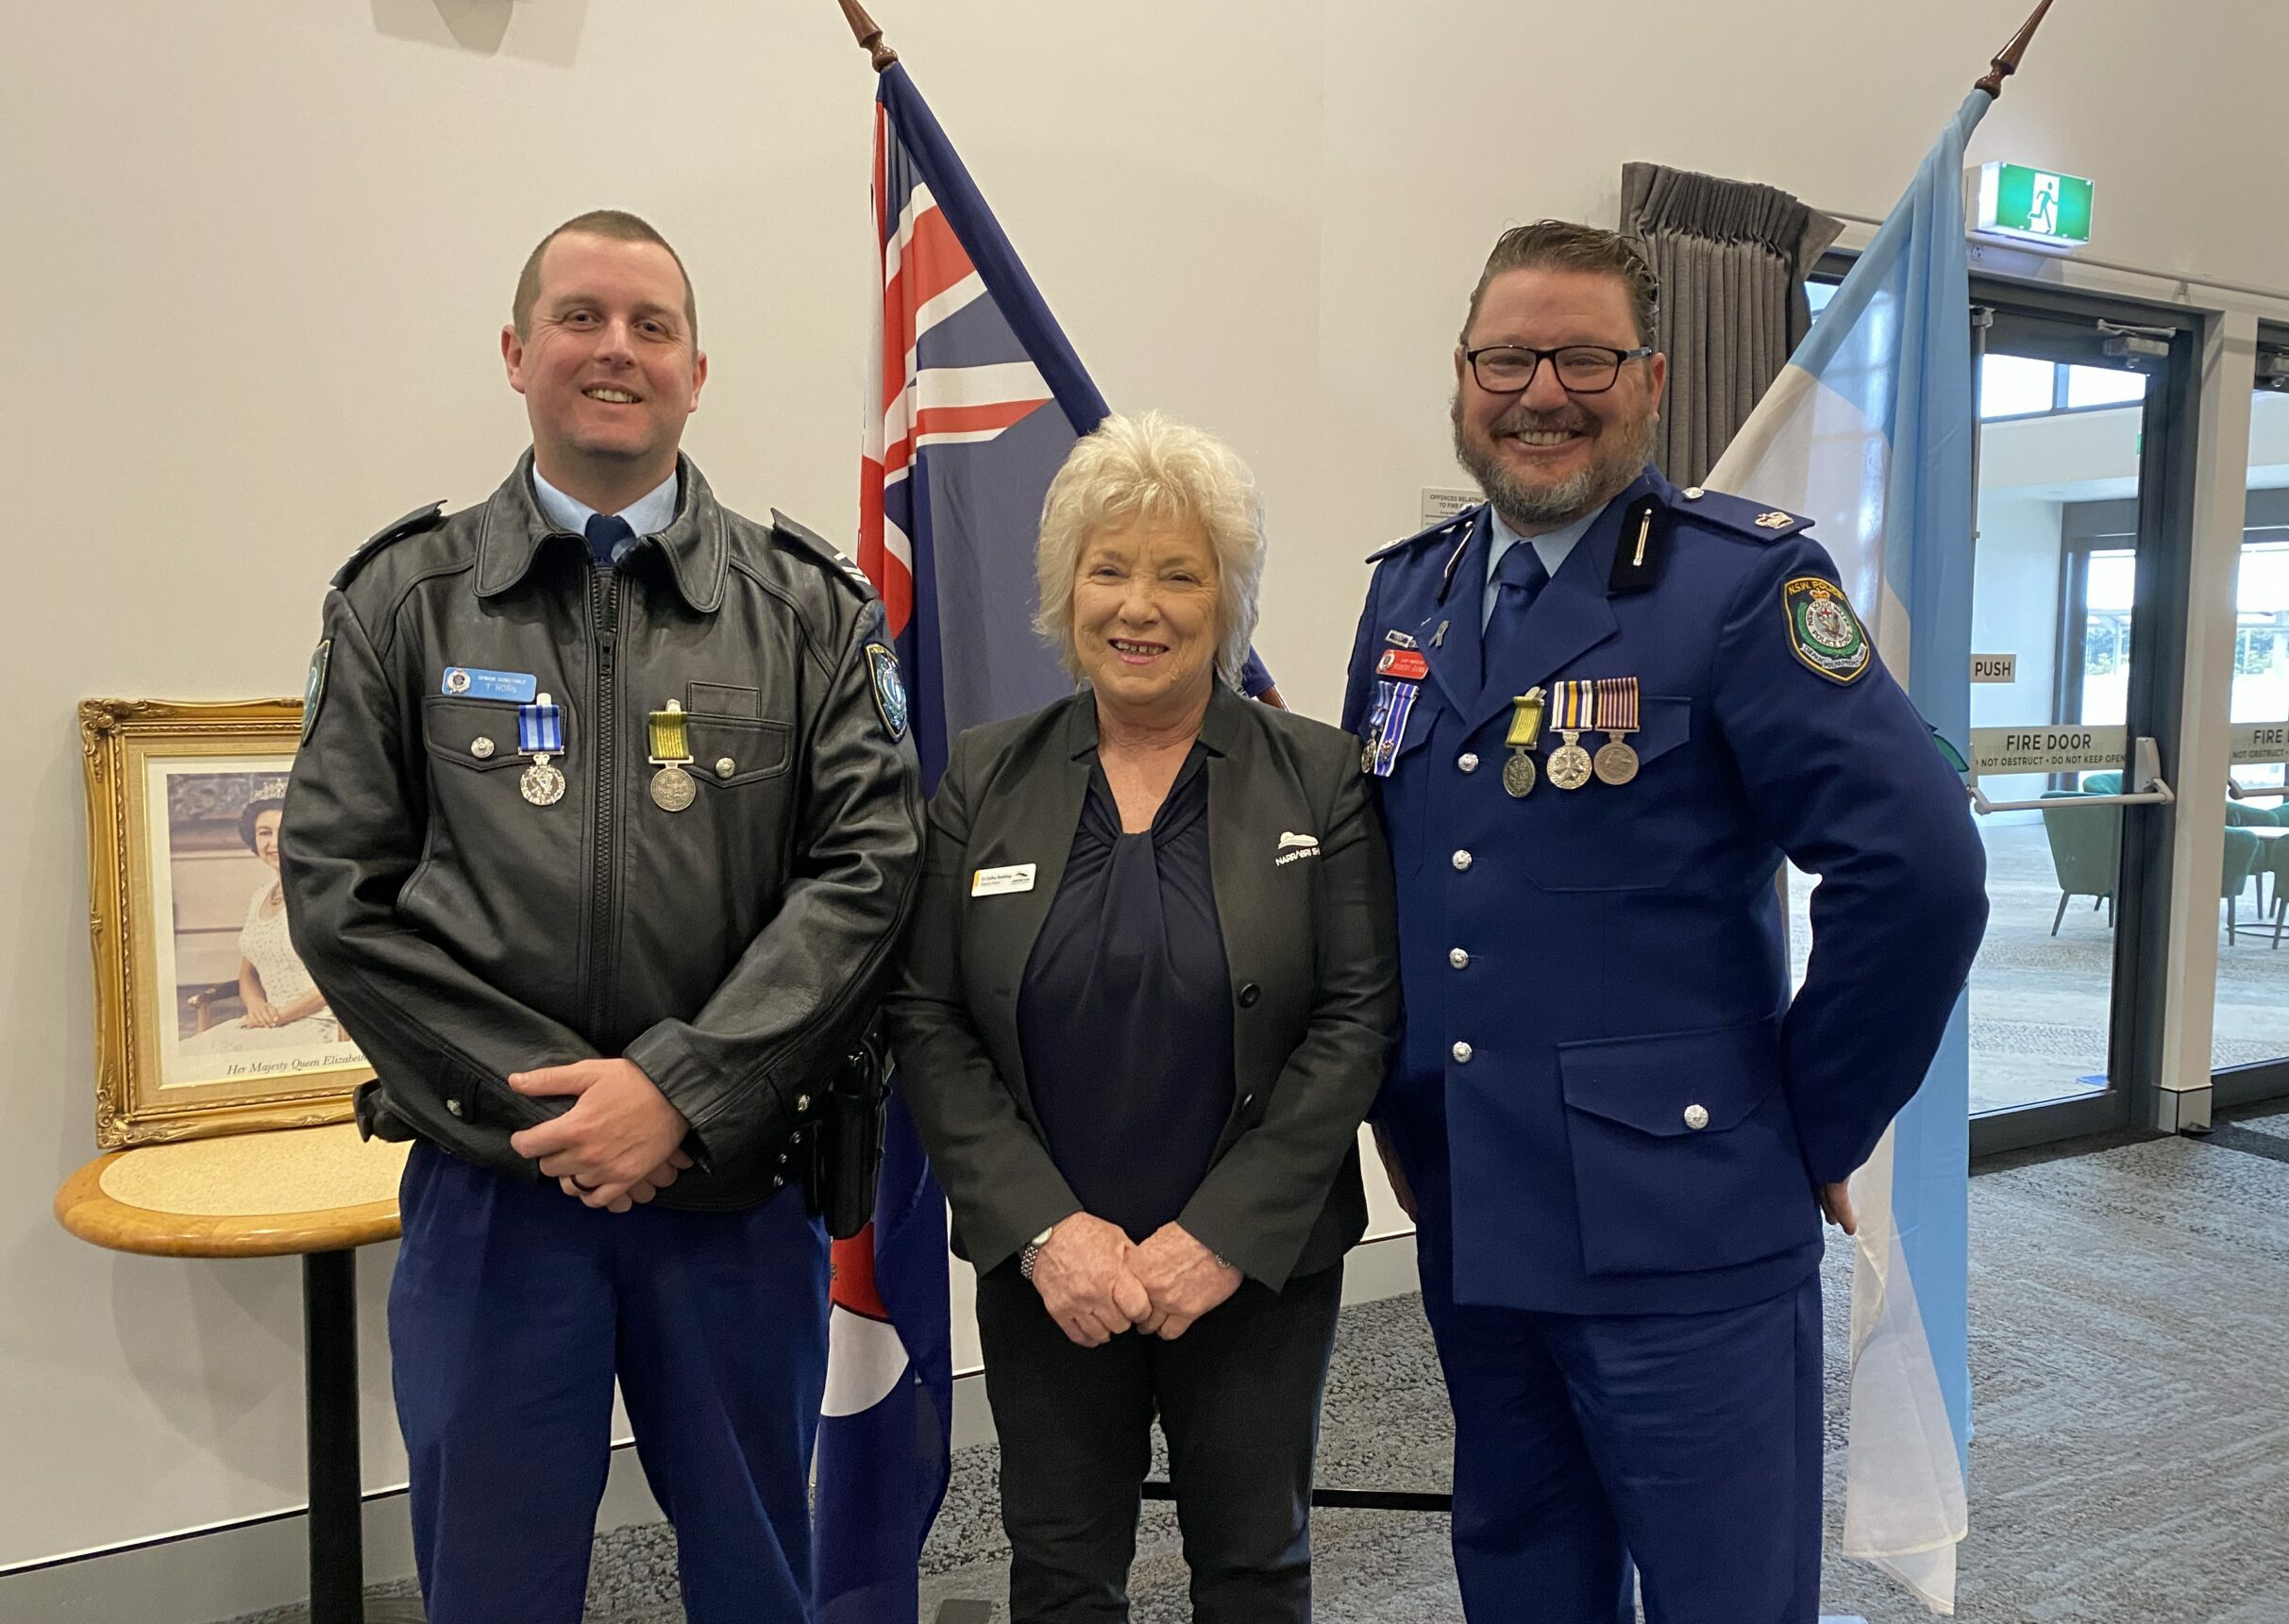 Local police honoured at medal ceremony